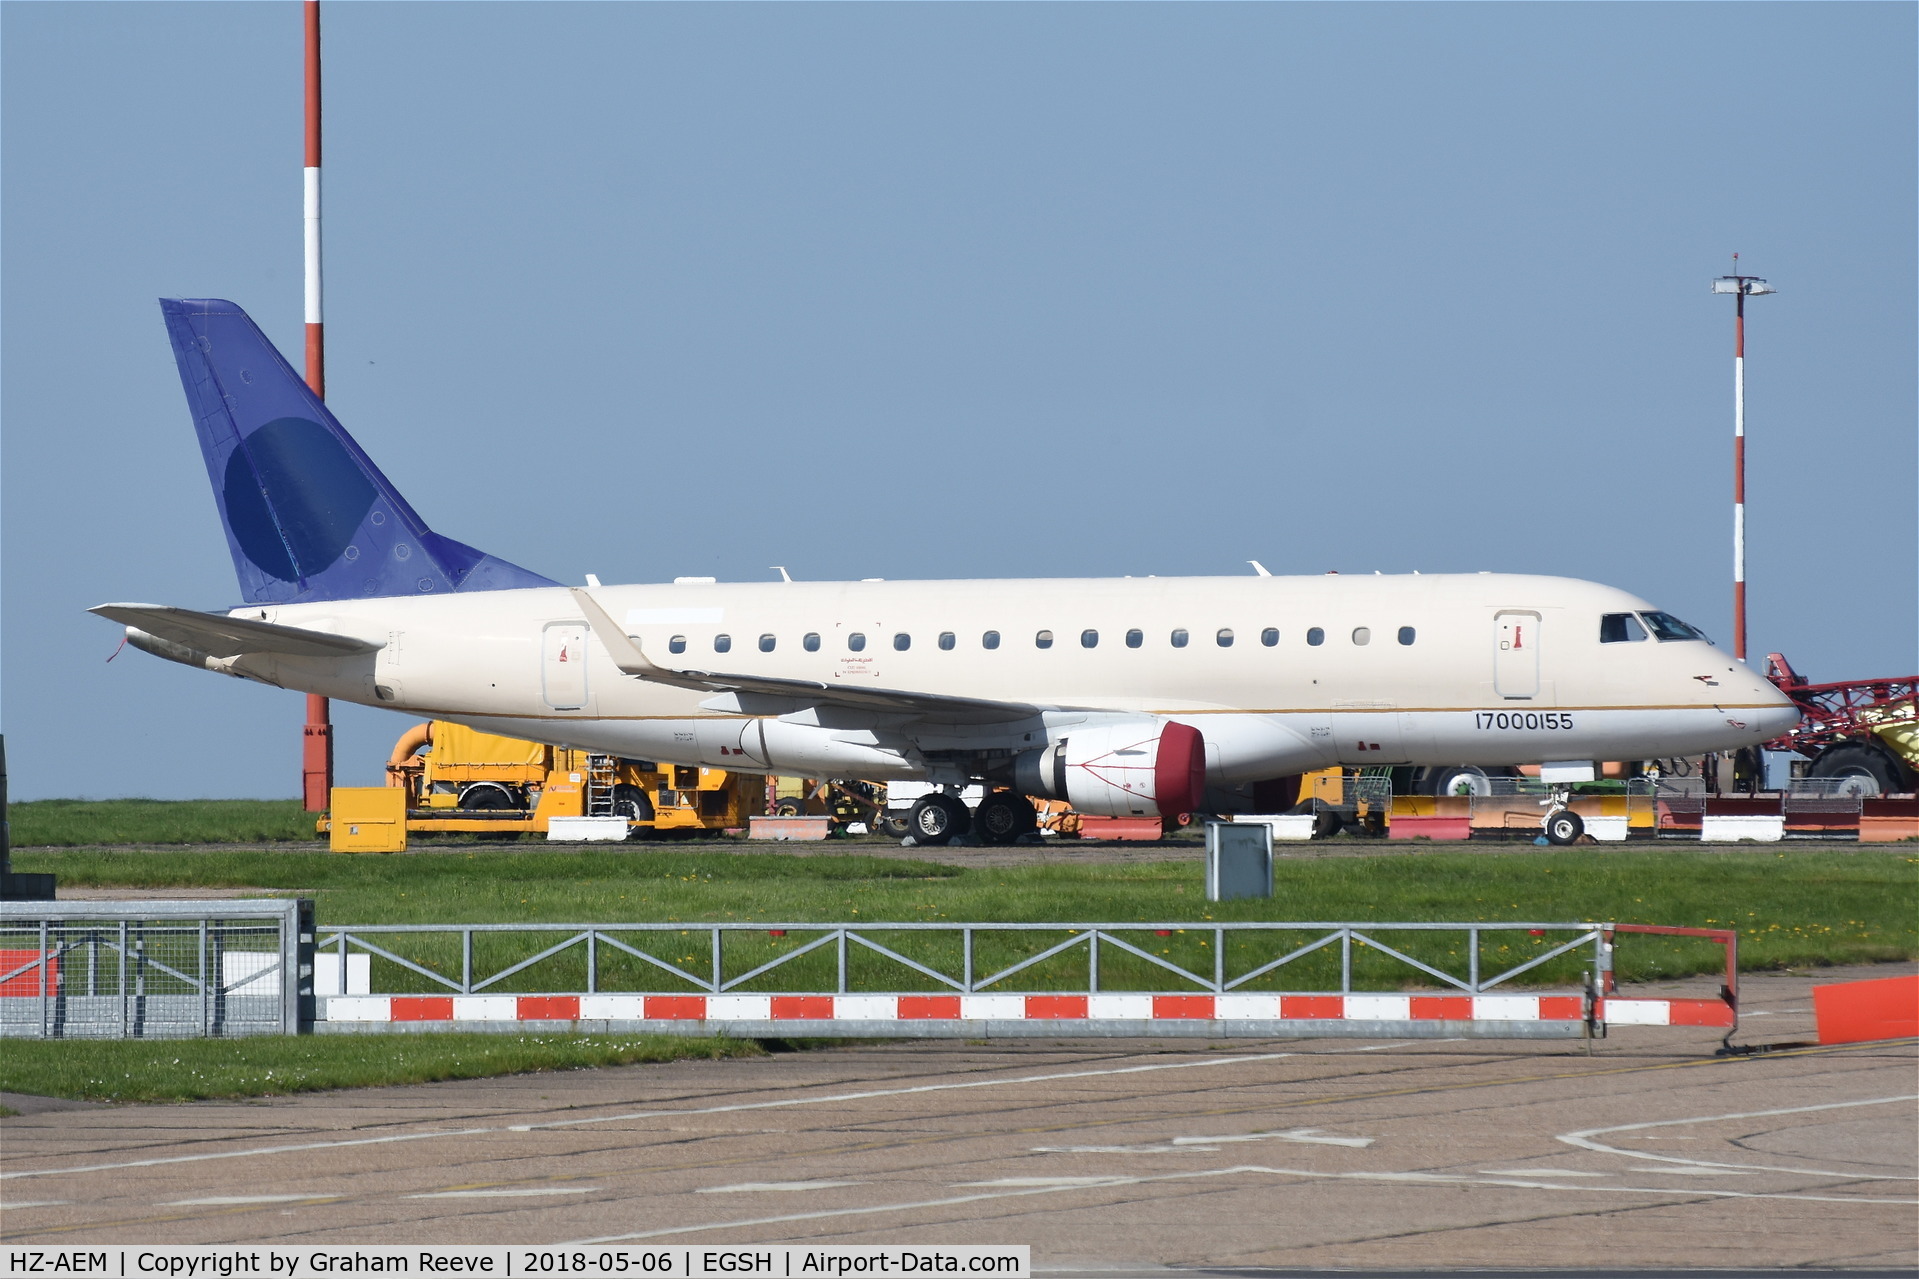 HZ-AEM, 2006 Embraer 170LR (ERJ-170-100LR) C/N 17000155, Parked at Norwich with reg removed and showing C/N.